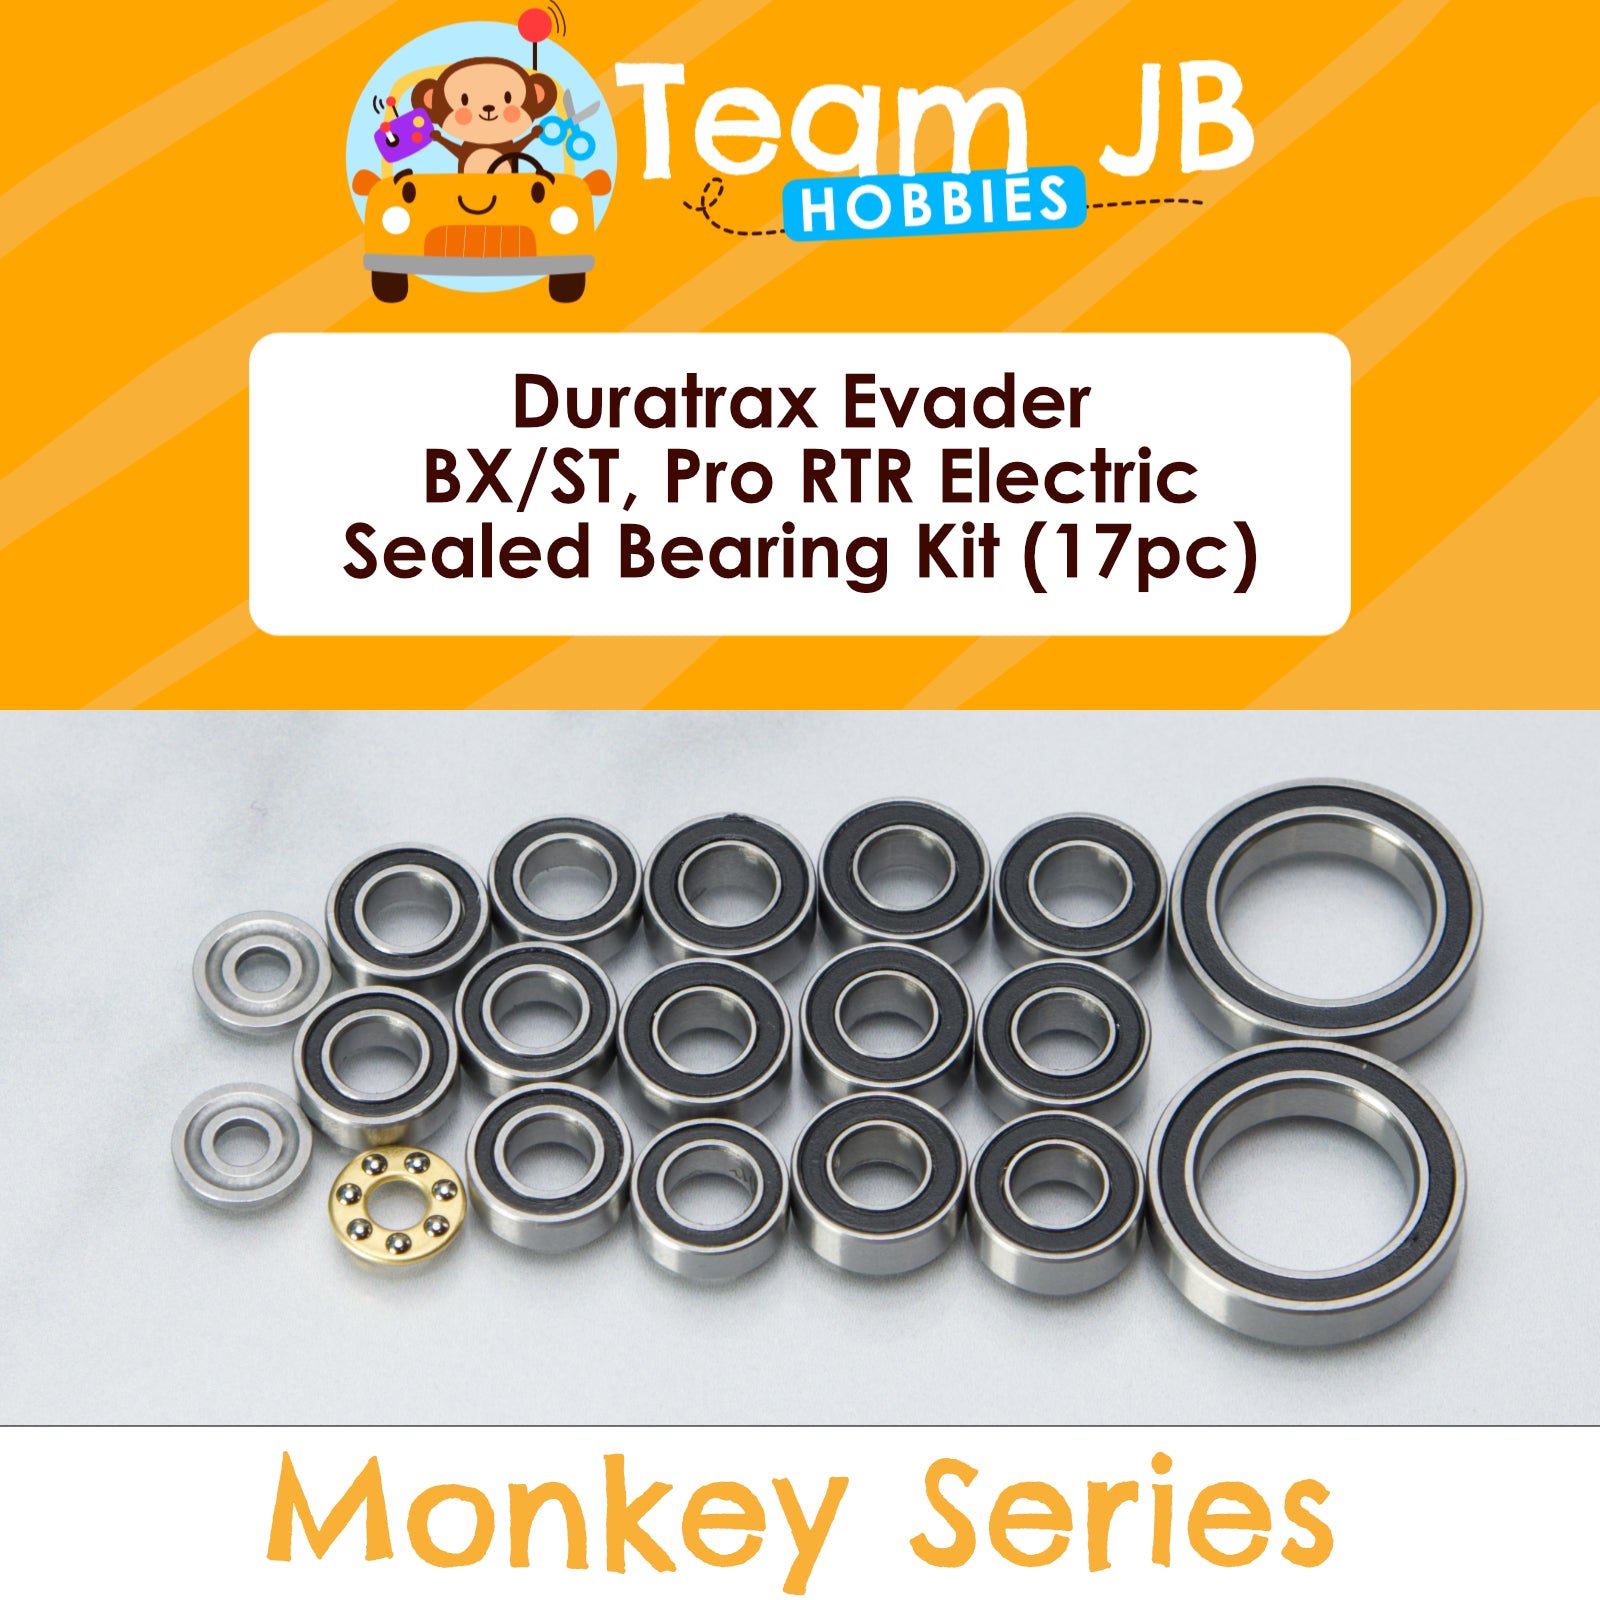 Duratrax Evader BX/ST, Pro RTR Electric  - Sealed Bearing Kit